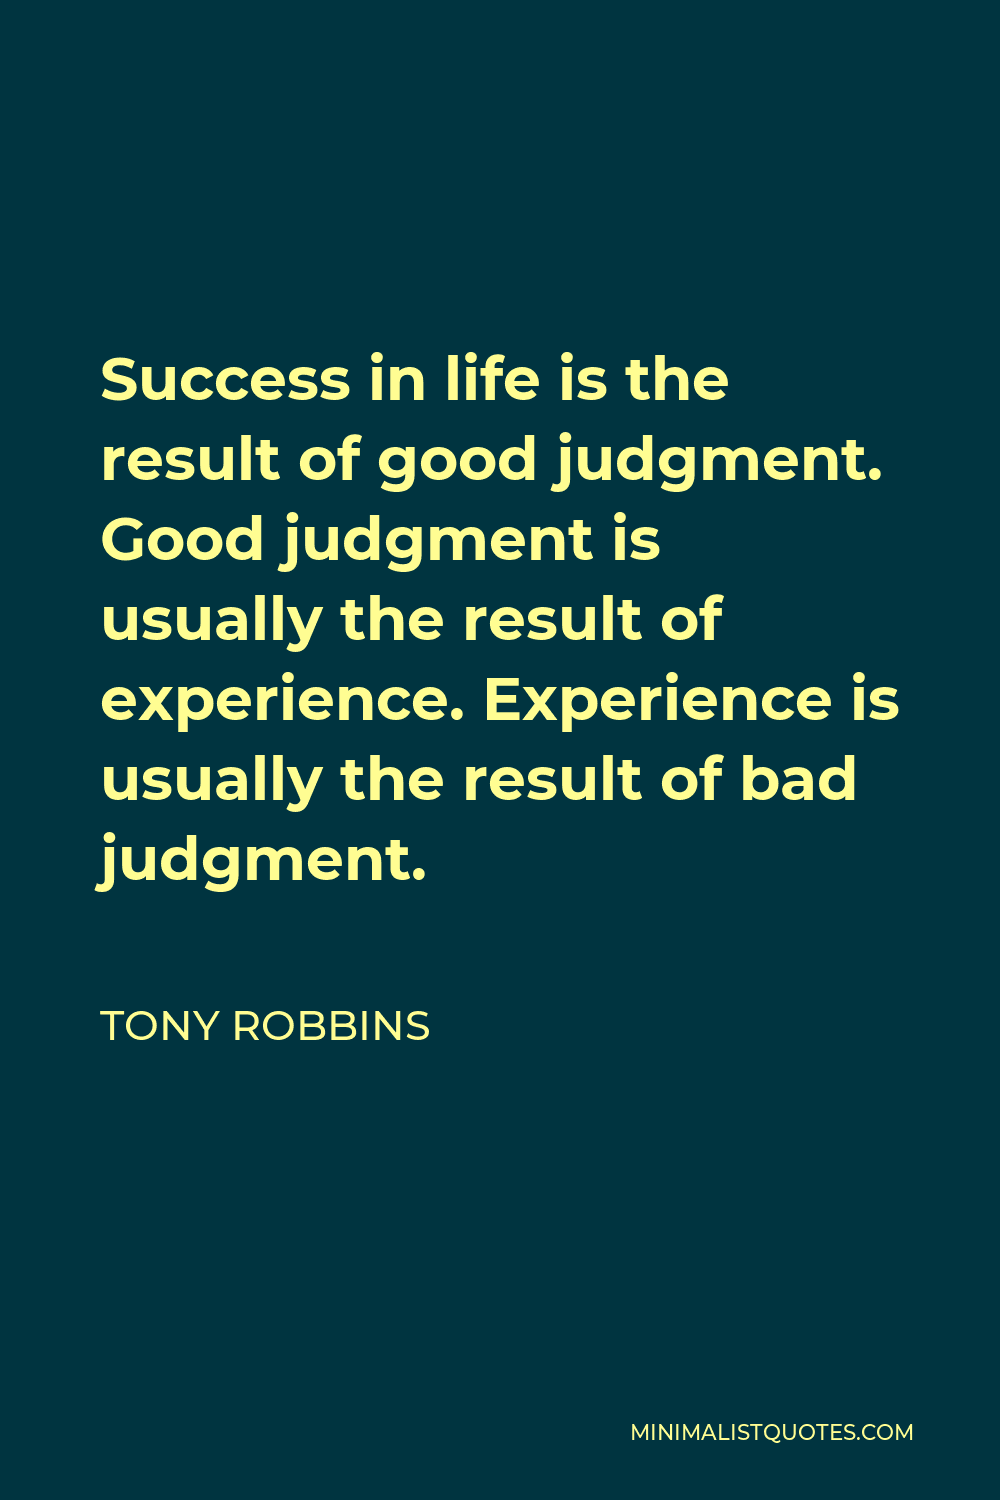 Tony Robbins Quote - Success in life is the result of good judgment. Good judgment is usually the result of experience. Experience is usually the result of bad judgment.